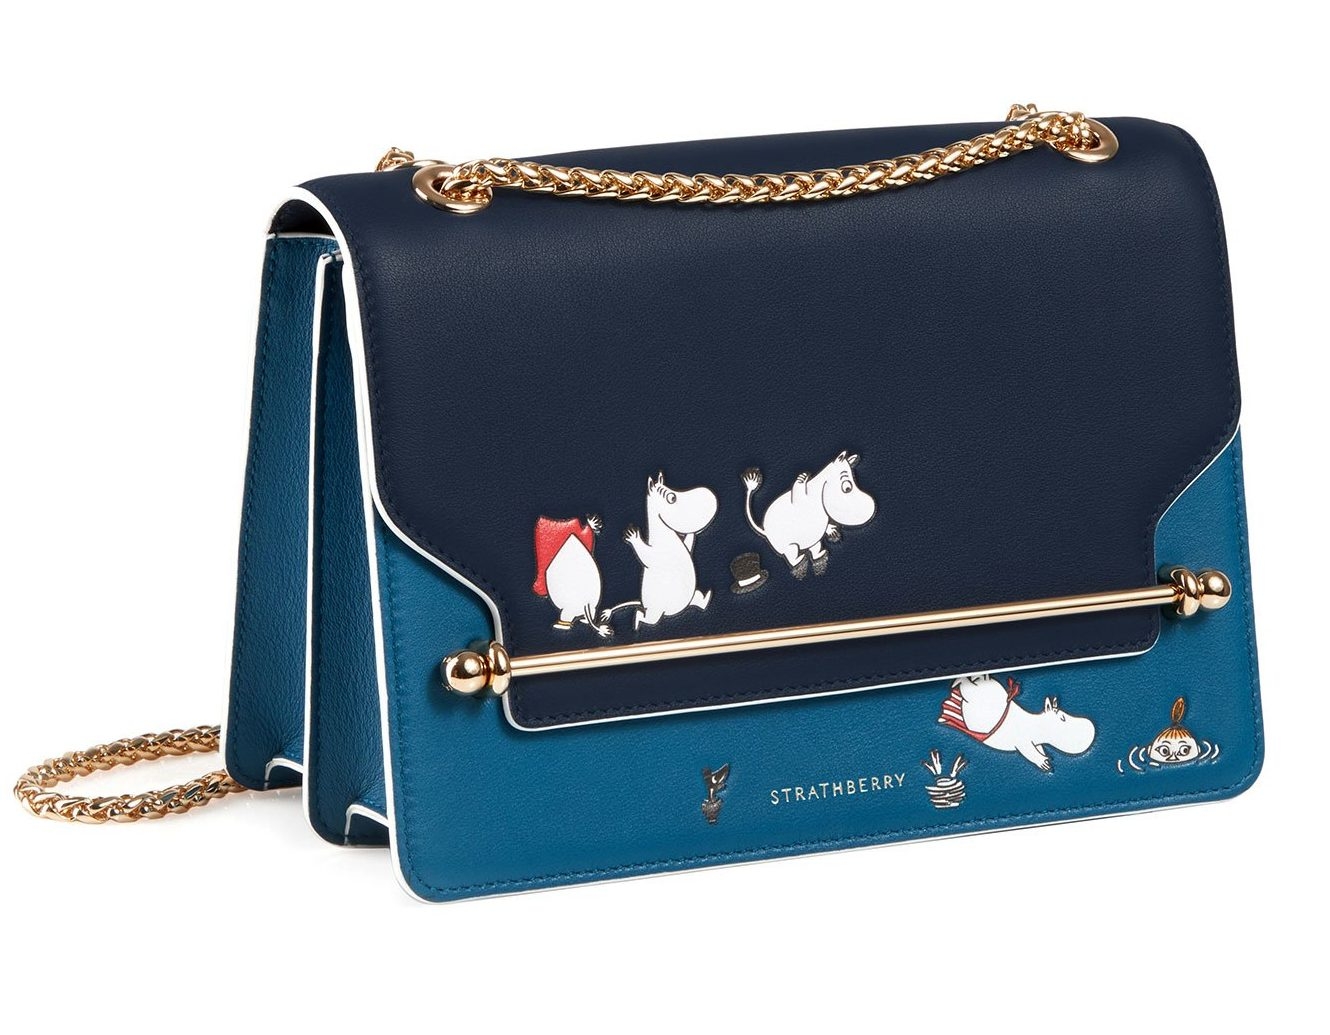 strathberry East/West – Moomin Dive £625 （約 HKD 6,290.35）